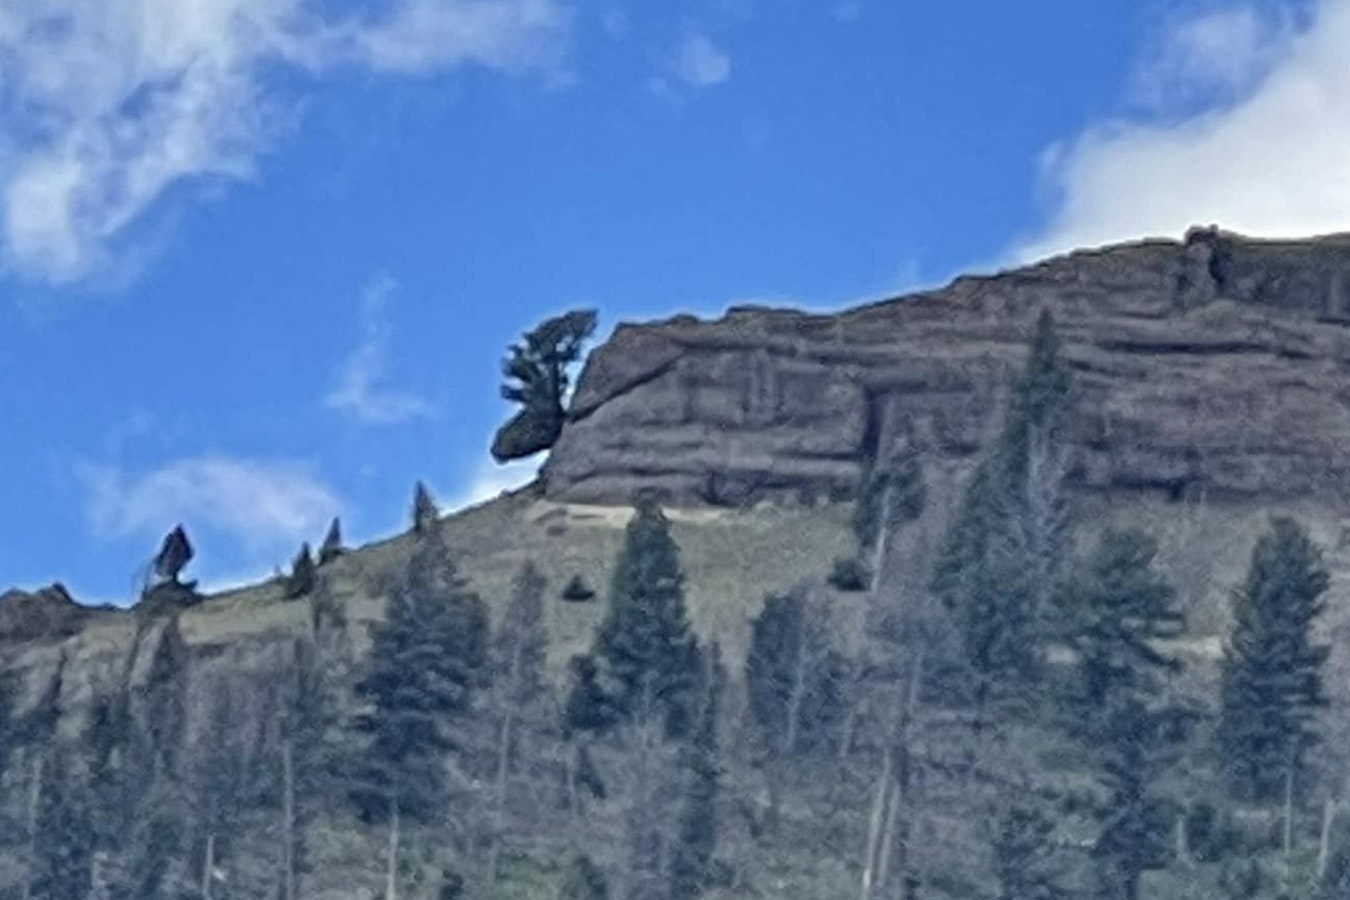 This tree growing from a rock face on a ridge in Yellowstone National Park’s Lamar Valley resembles a moose head. But folks have to know just where to look to see it.